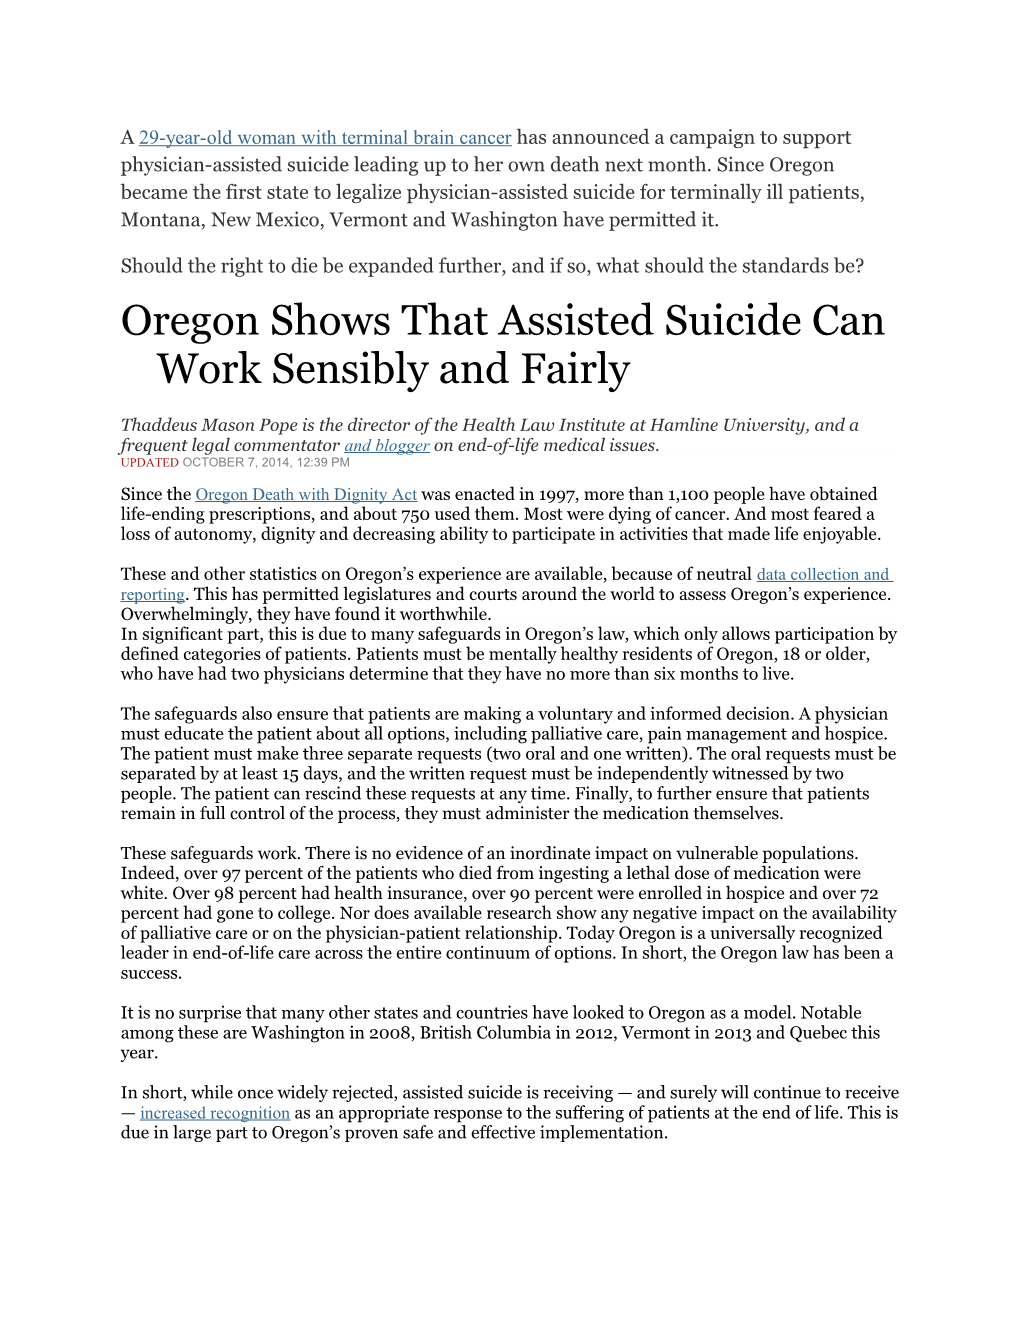 Oregon Shows That Assisted Suicide Can Work Sensibly Andfairly